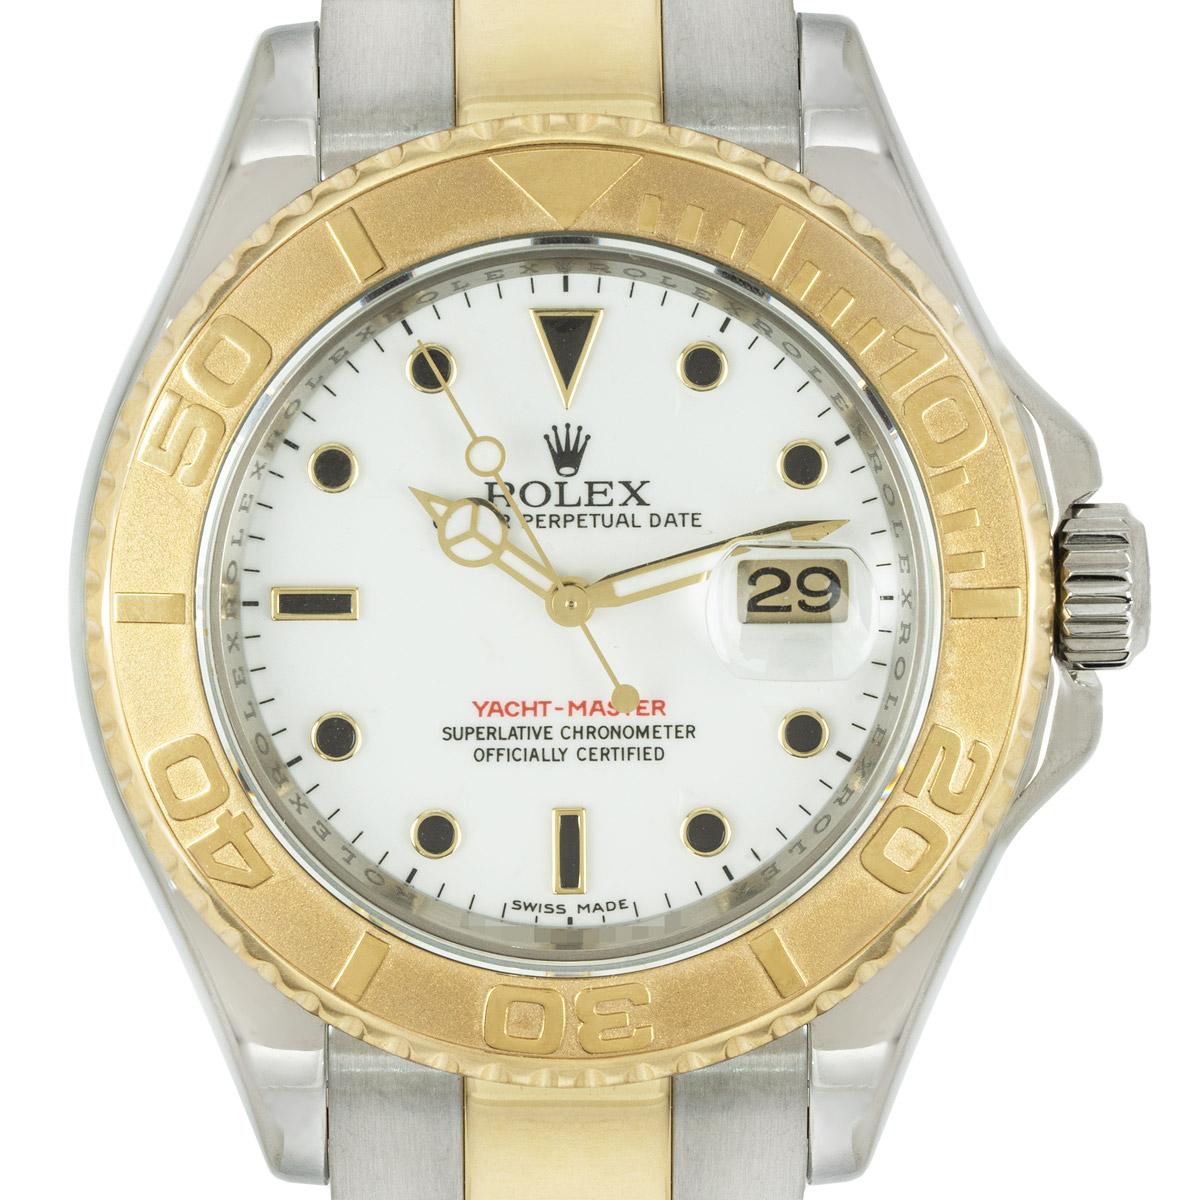 A men's Yacht-Master in stainless steel and yellow gold by Rolex. Features a white dial with applied hour markers, a date aperture and a bidirectional rotatable bezel with 60-minute graduations.

Fitted with a scratch-resistant sapphire crystal and